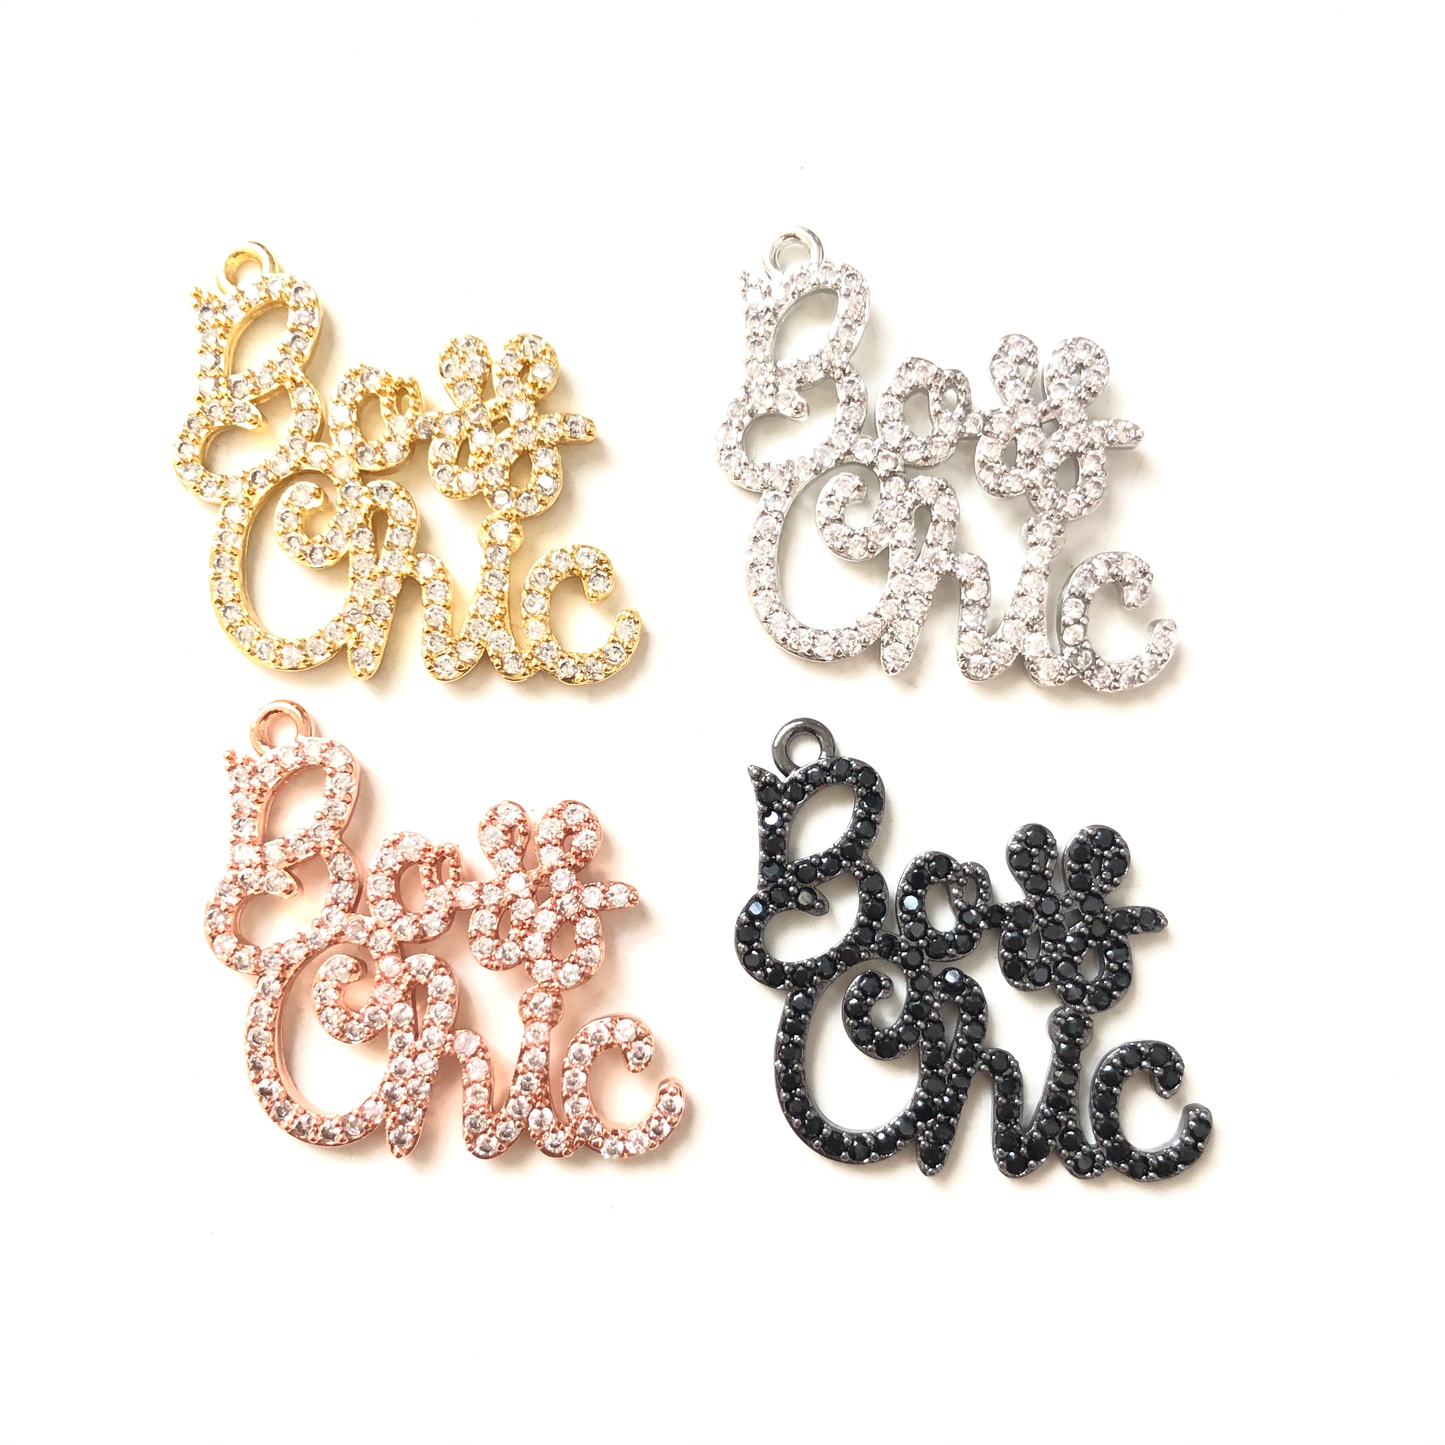 10pcs/lot 30*30mm CZ Paved Boss Chic Charms CZ Paved Charms Words & Quotes Charms Beads Beyond